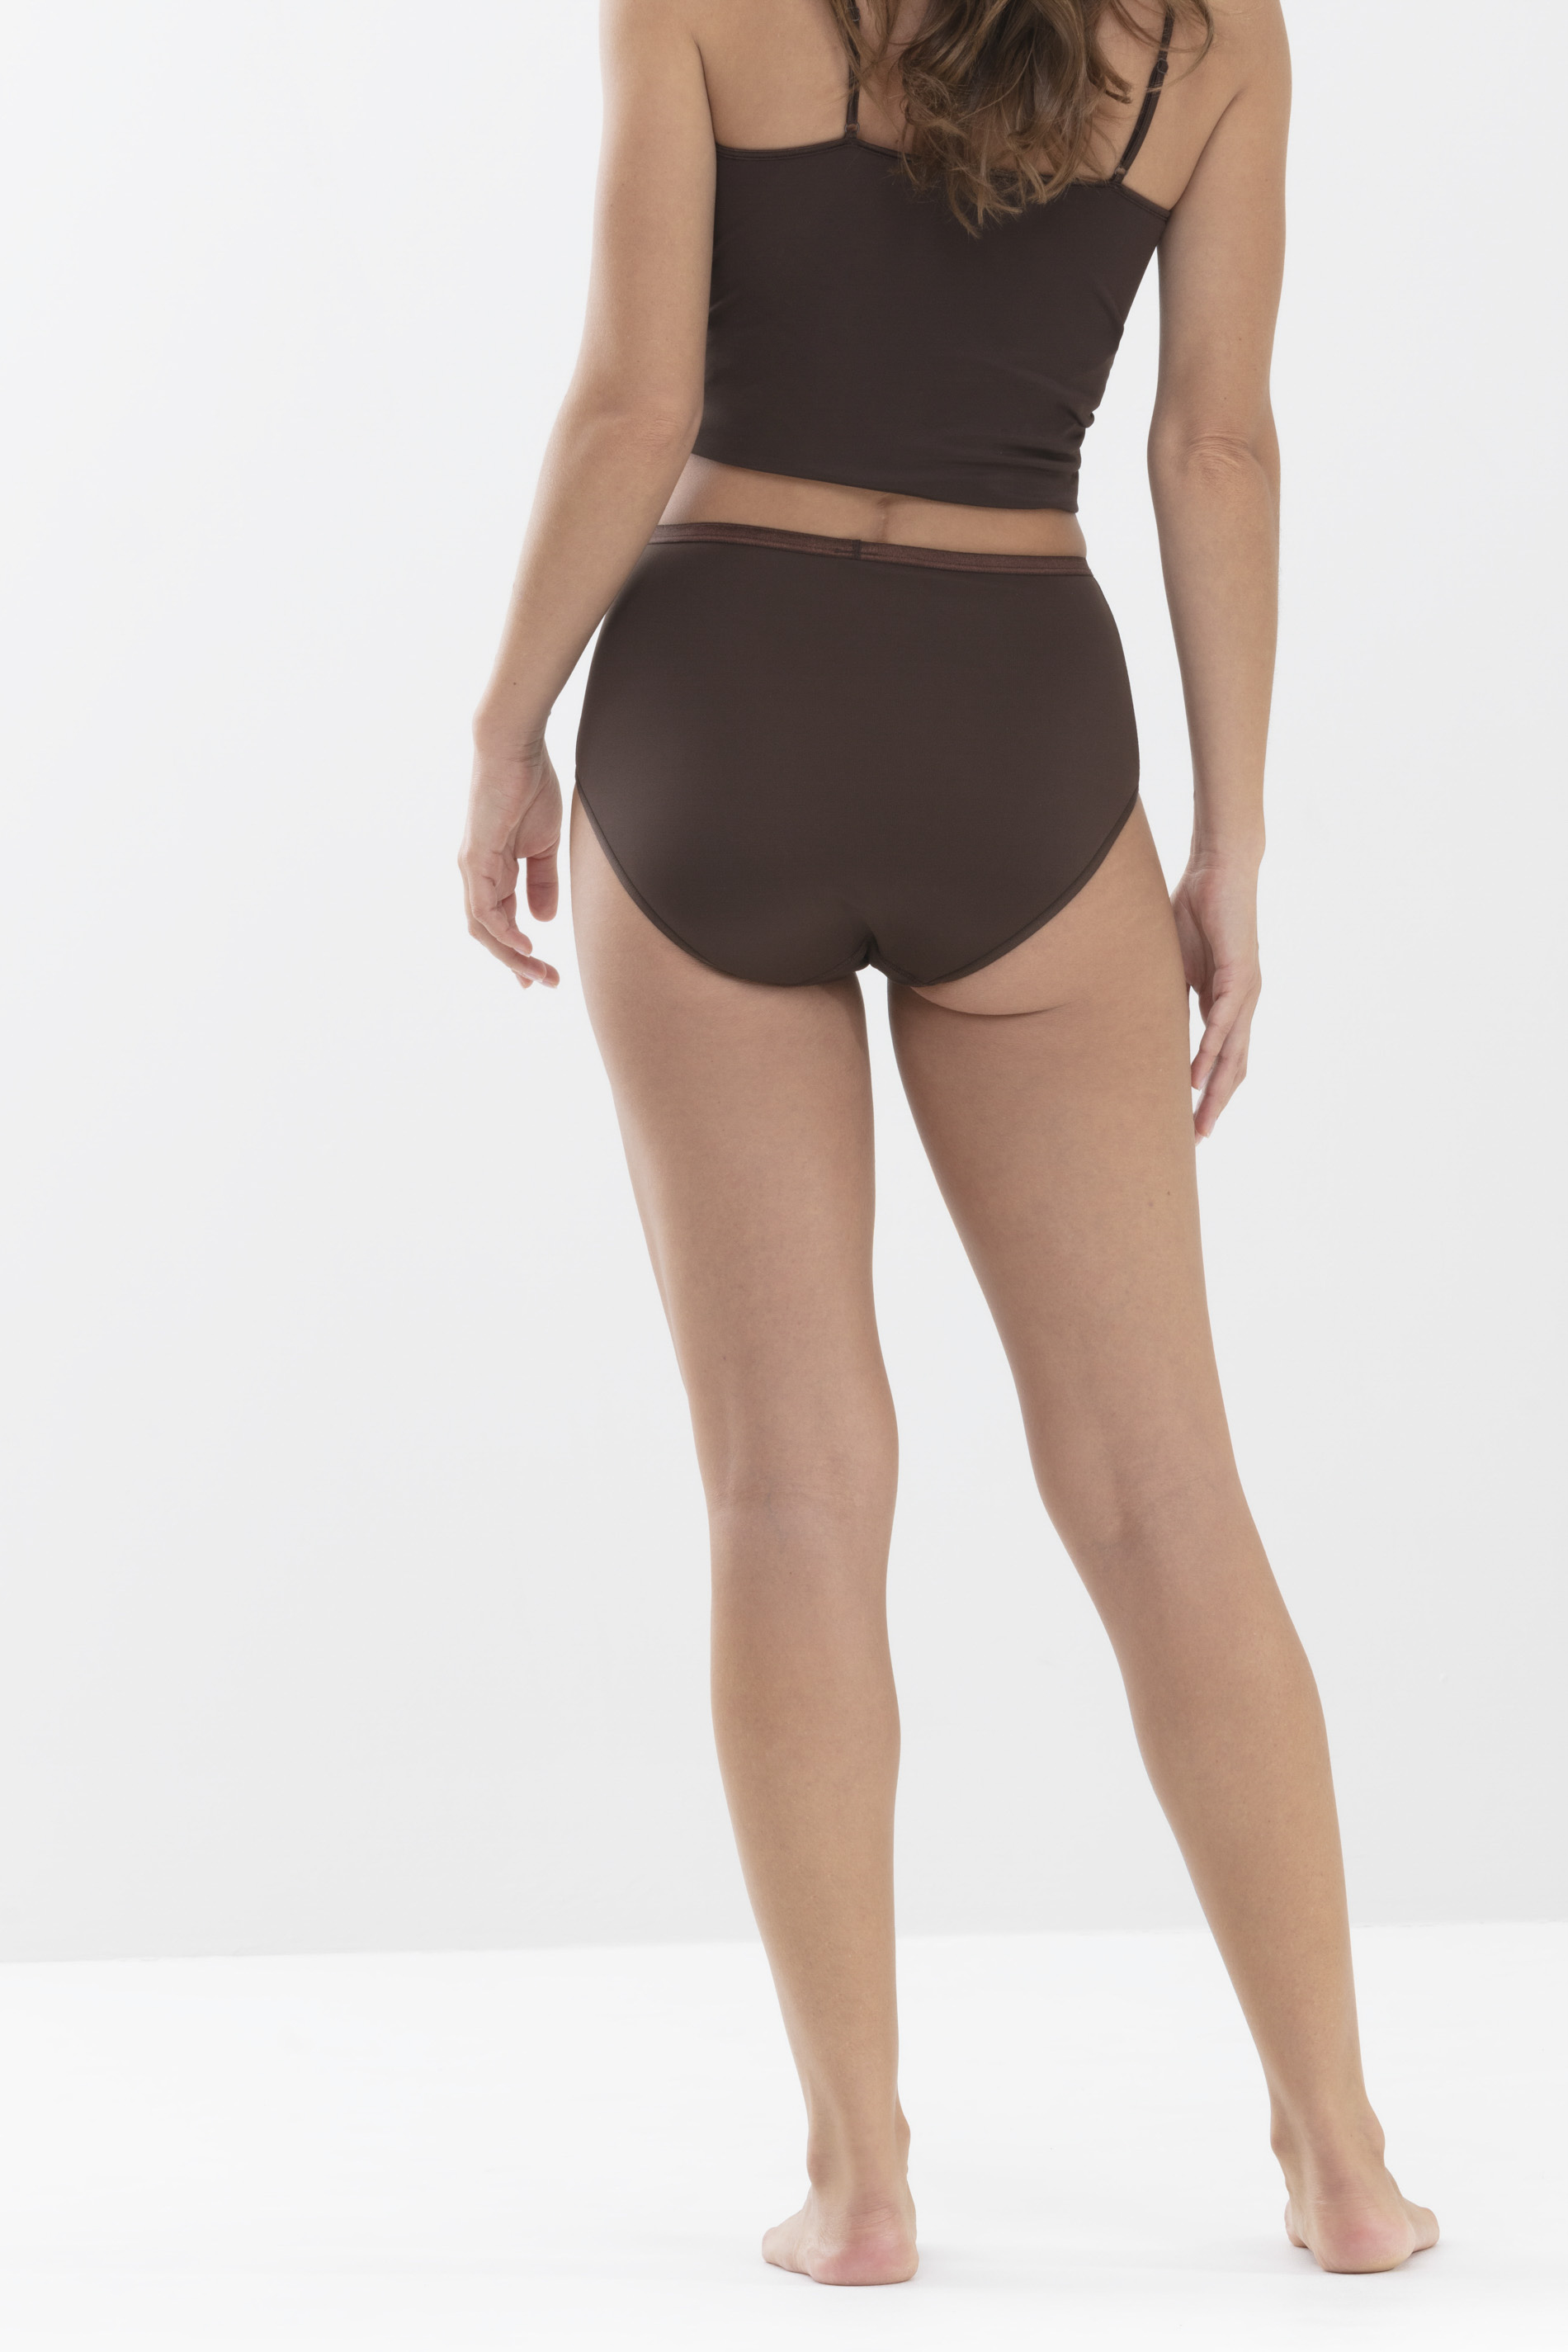 Hipster Liquorice Brown Serie Emotion Rear View | mey®